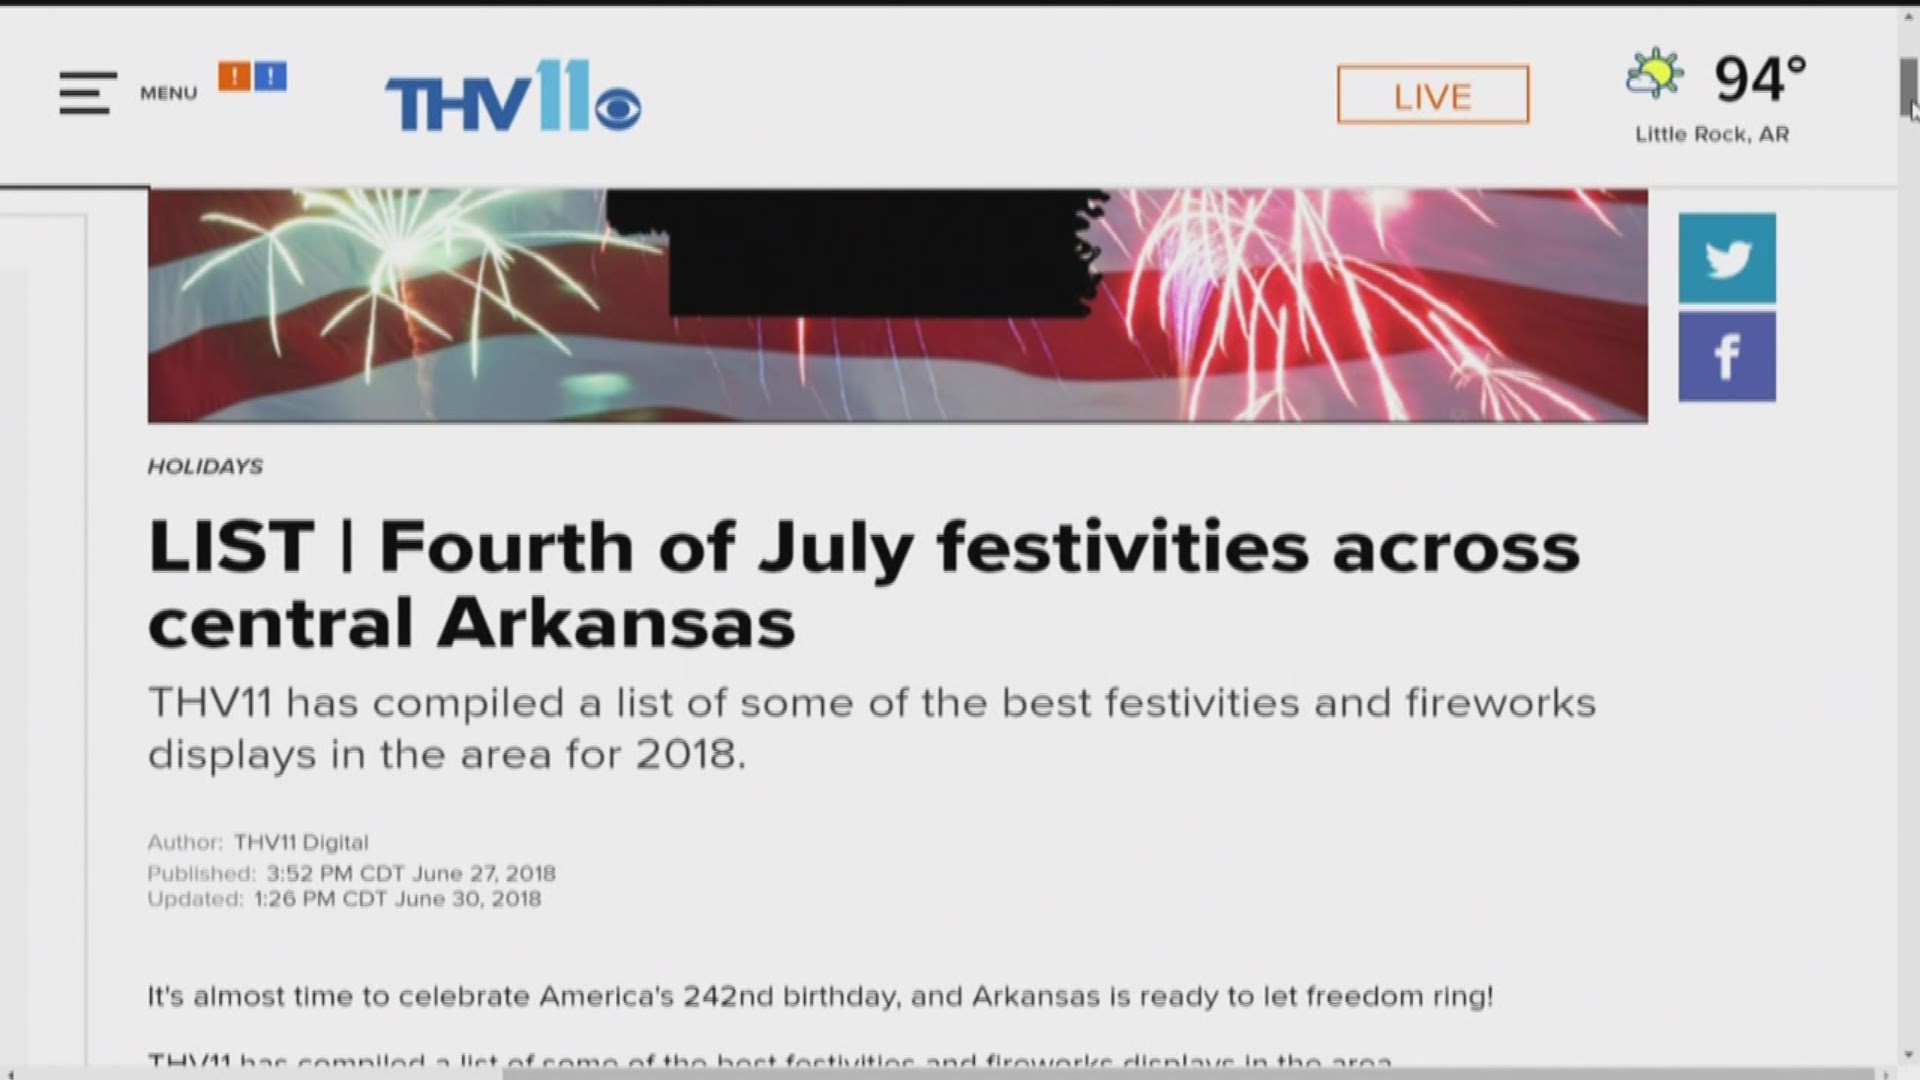 You can find the list of Fourth of July activities on THV11.com